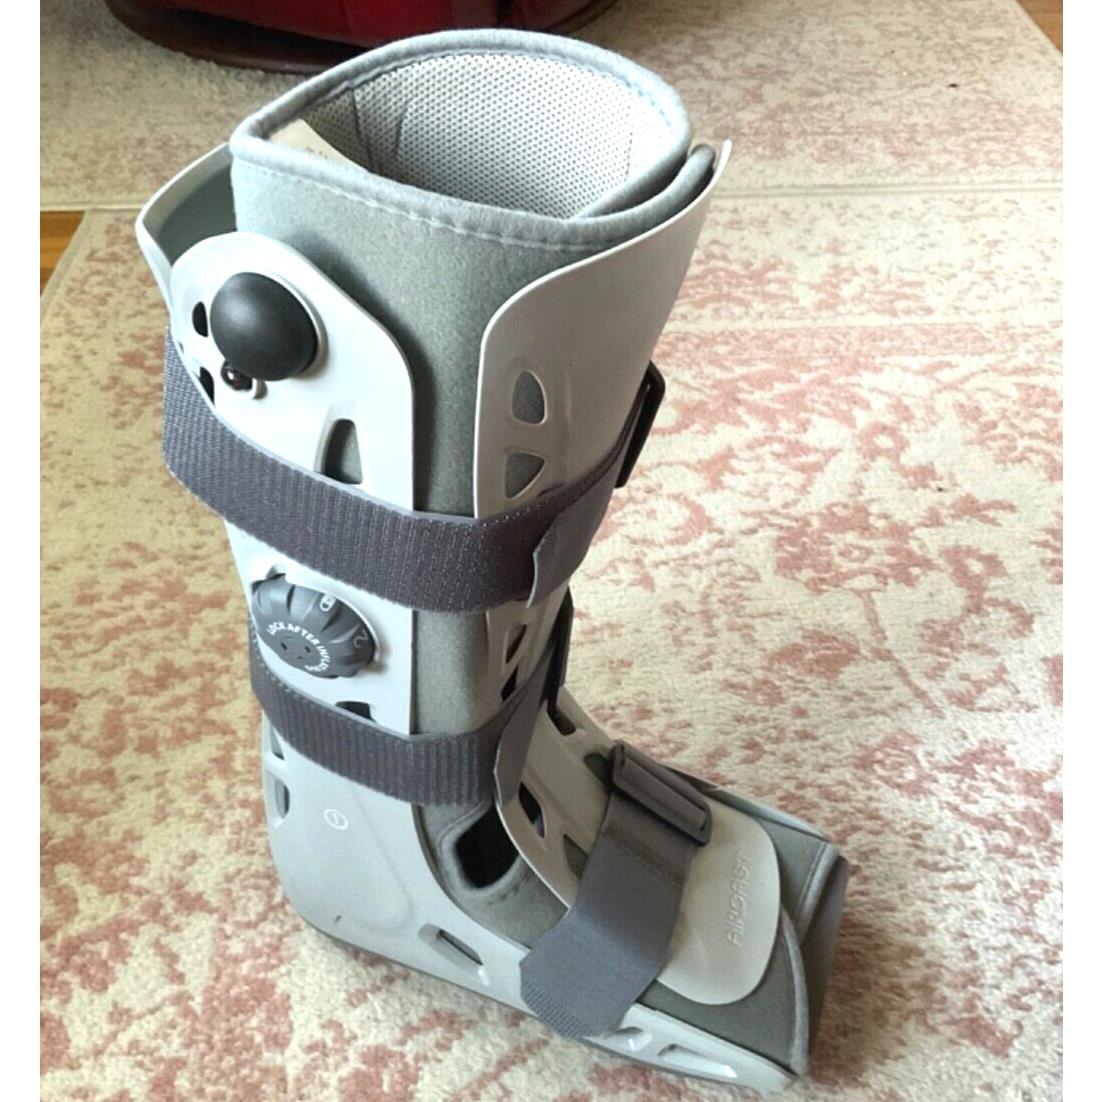 Aircast Air Pump Ankle Medical Boot Walking Cast Foot Injury Brace - Size: Large